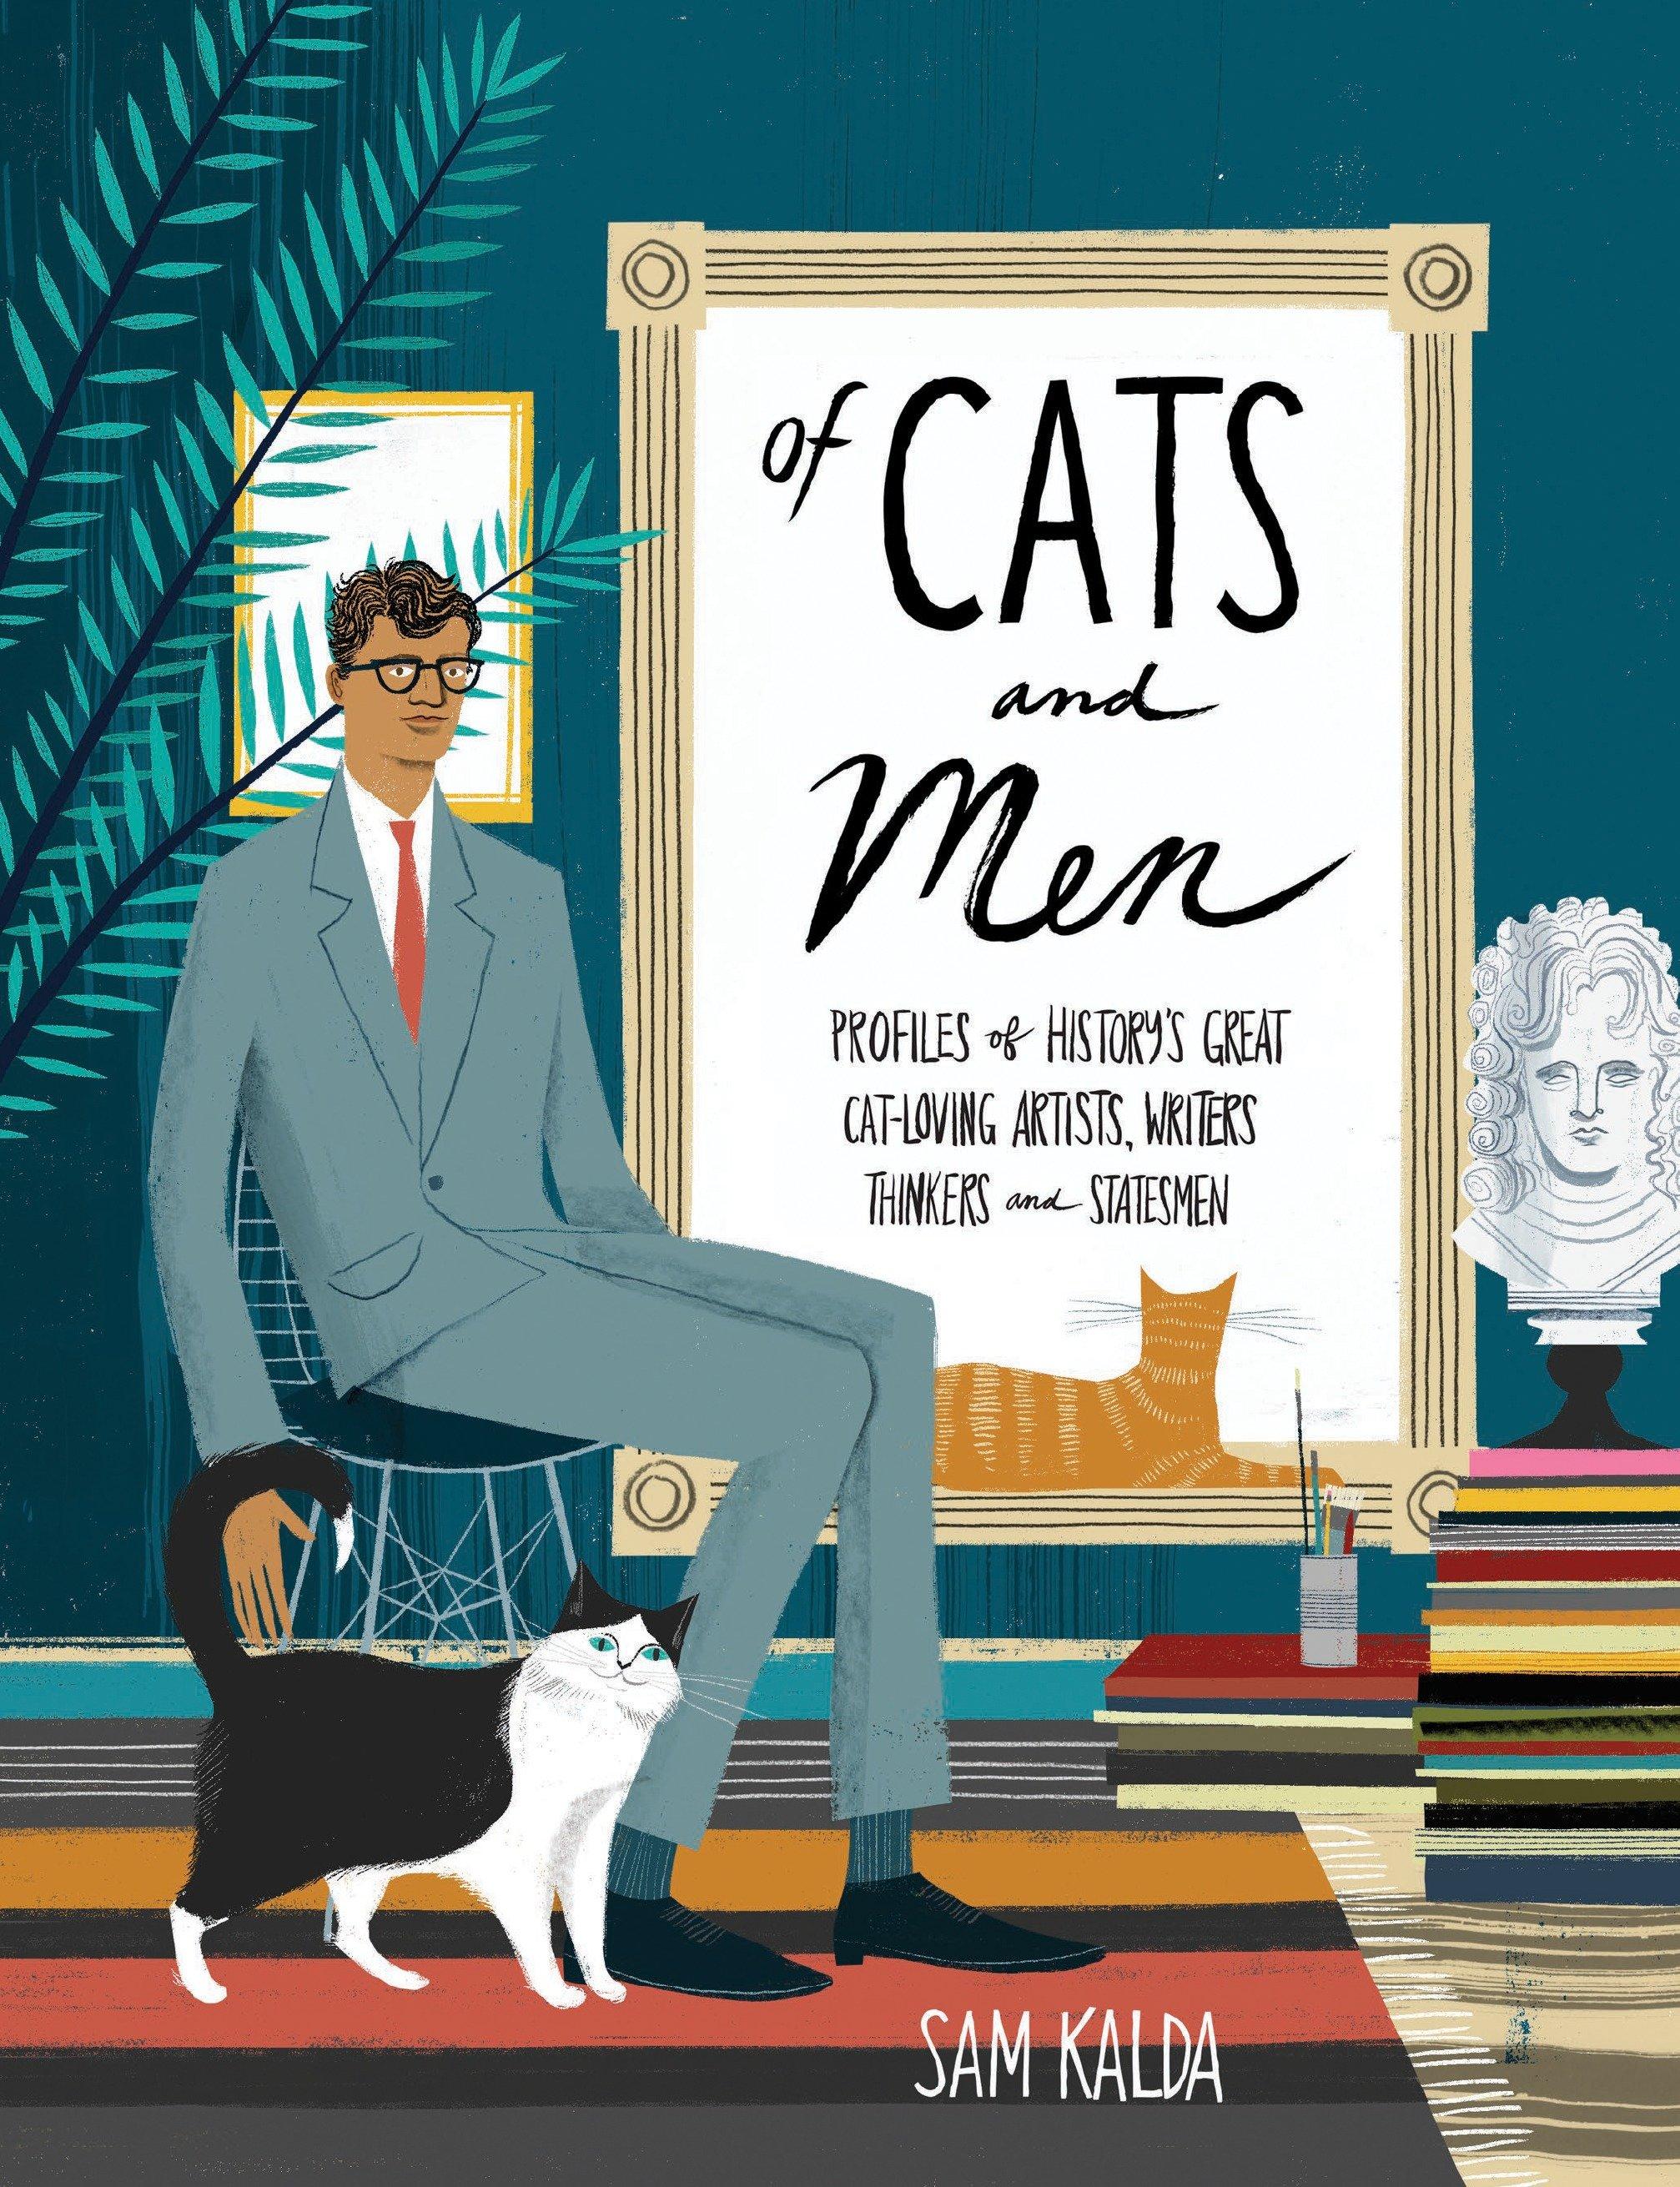 Of Cats and Men / Profiles of History's Great Cat-Loving Artists, Writers, Thinkers, and Statesmen / Sam Kalda / Buch / 102 S. / Englisch / 2017 / Random House LLC US / EAN 9780399578441 - Kalda, Sam